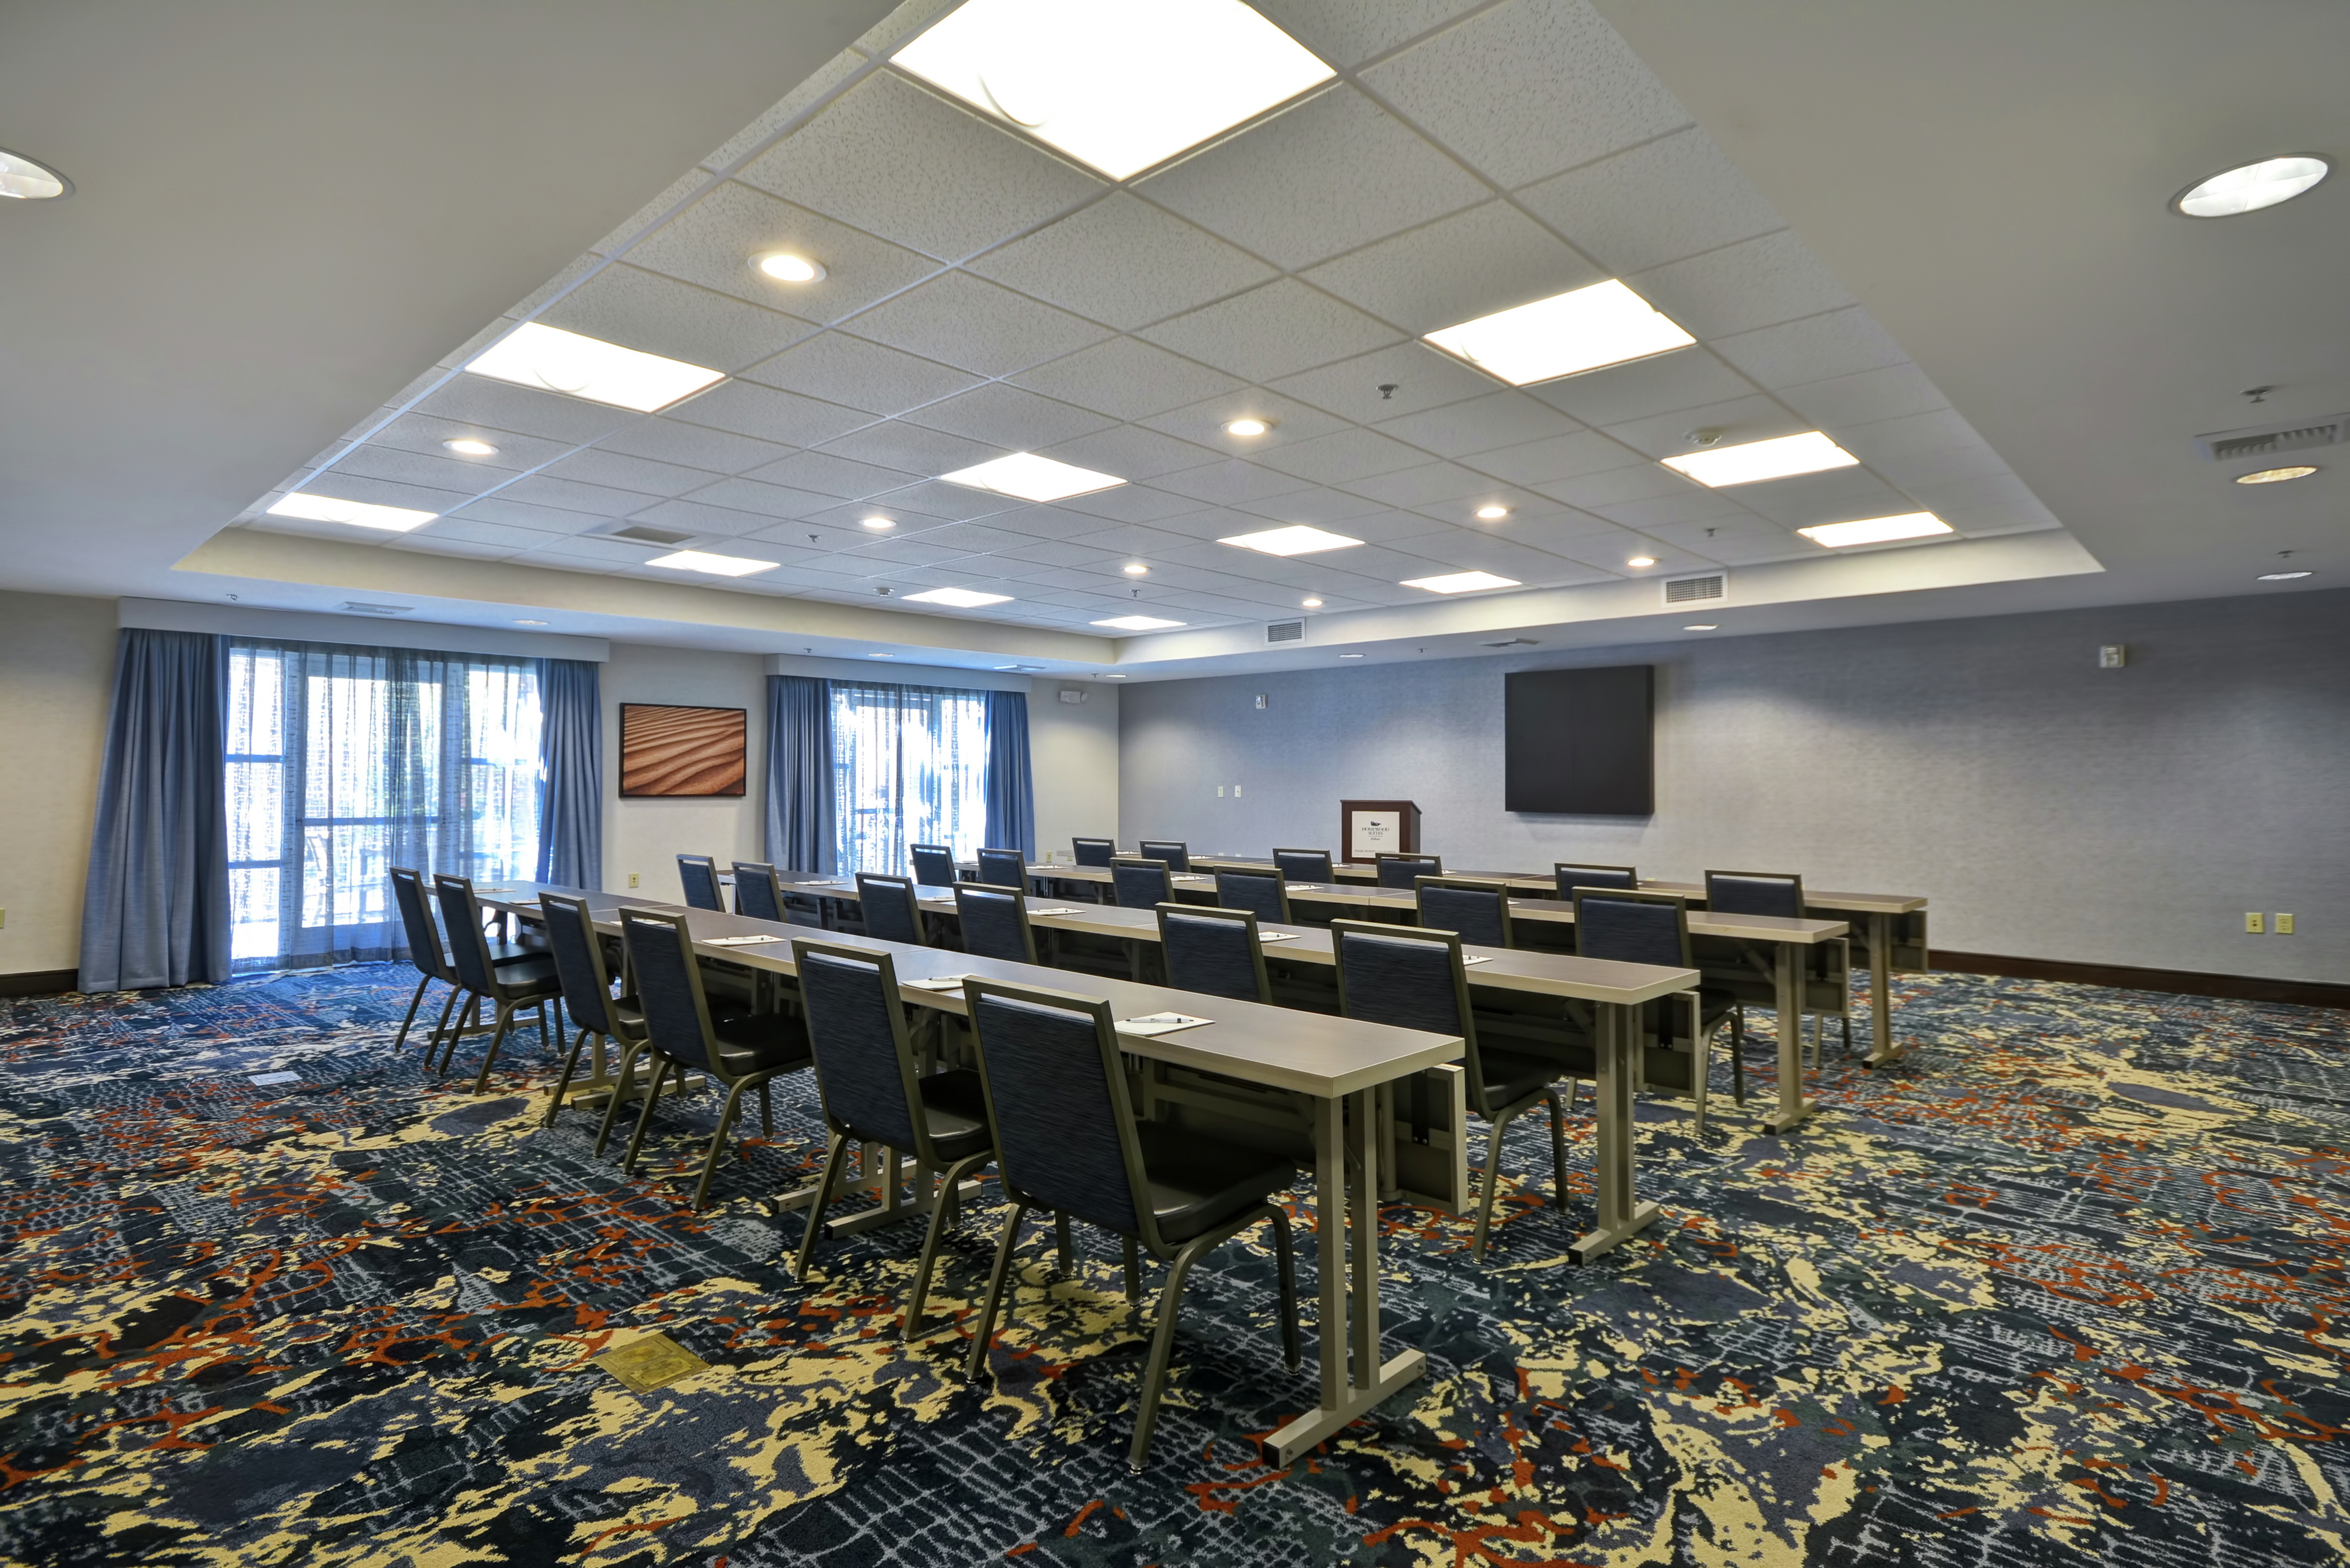 Classroom Setup in Meeting Room With Tables and Chairs Facing TV and Podium